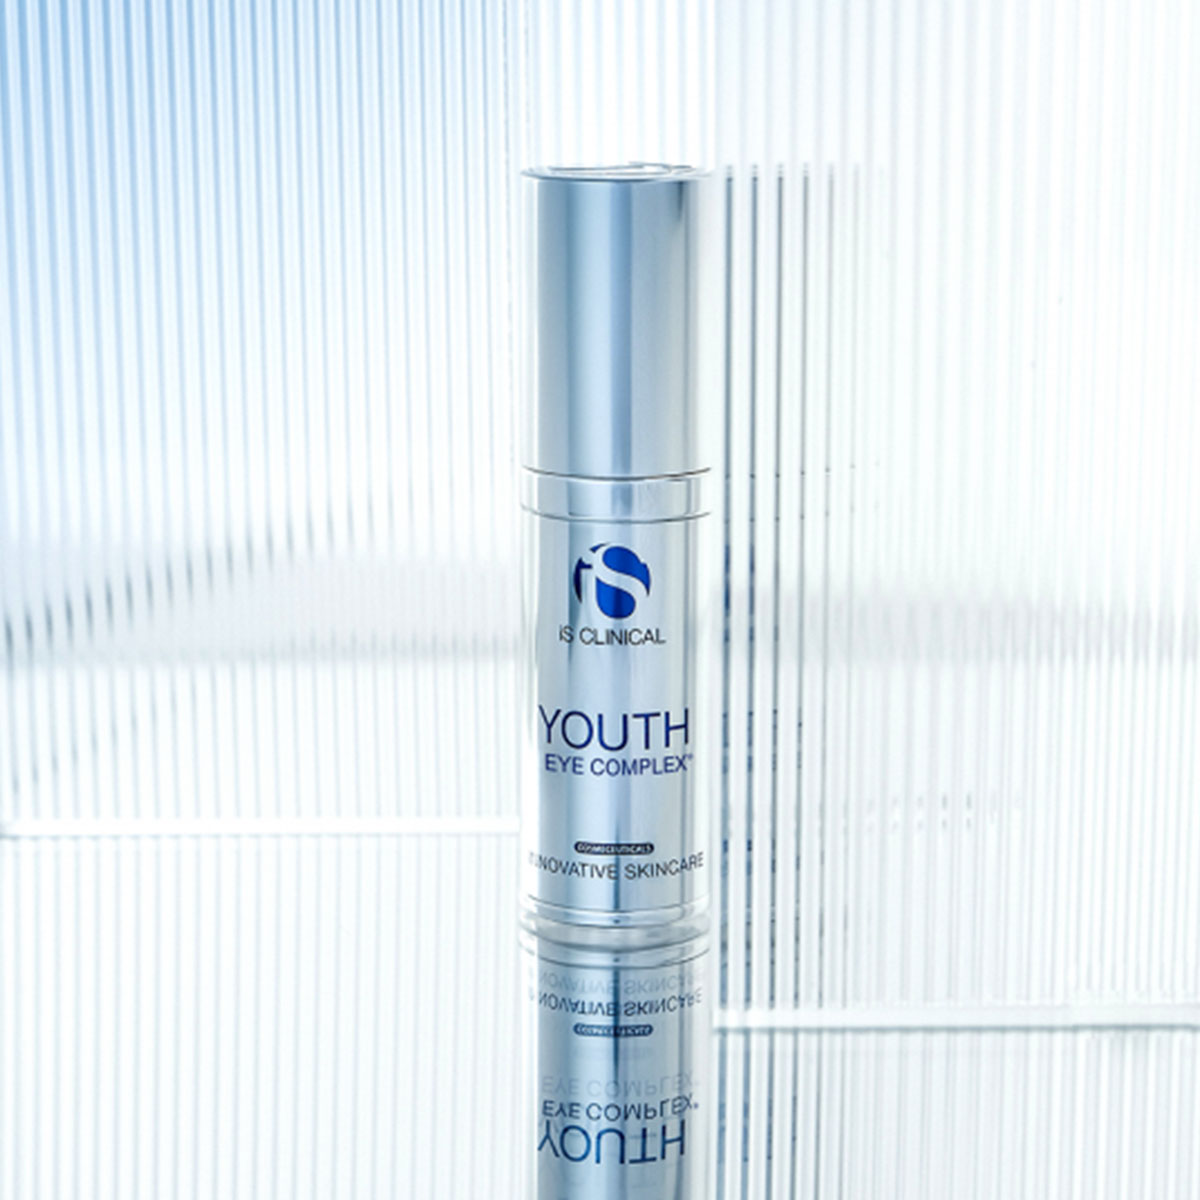 is clinical youth eye complex botanical anti-aging skincare